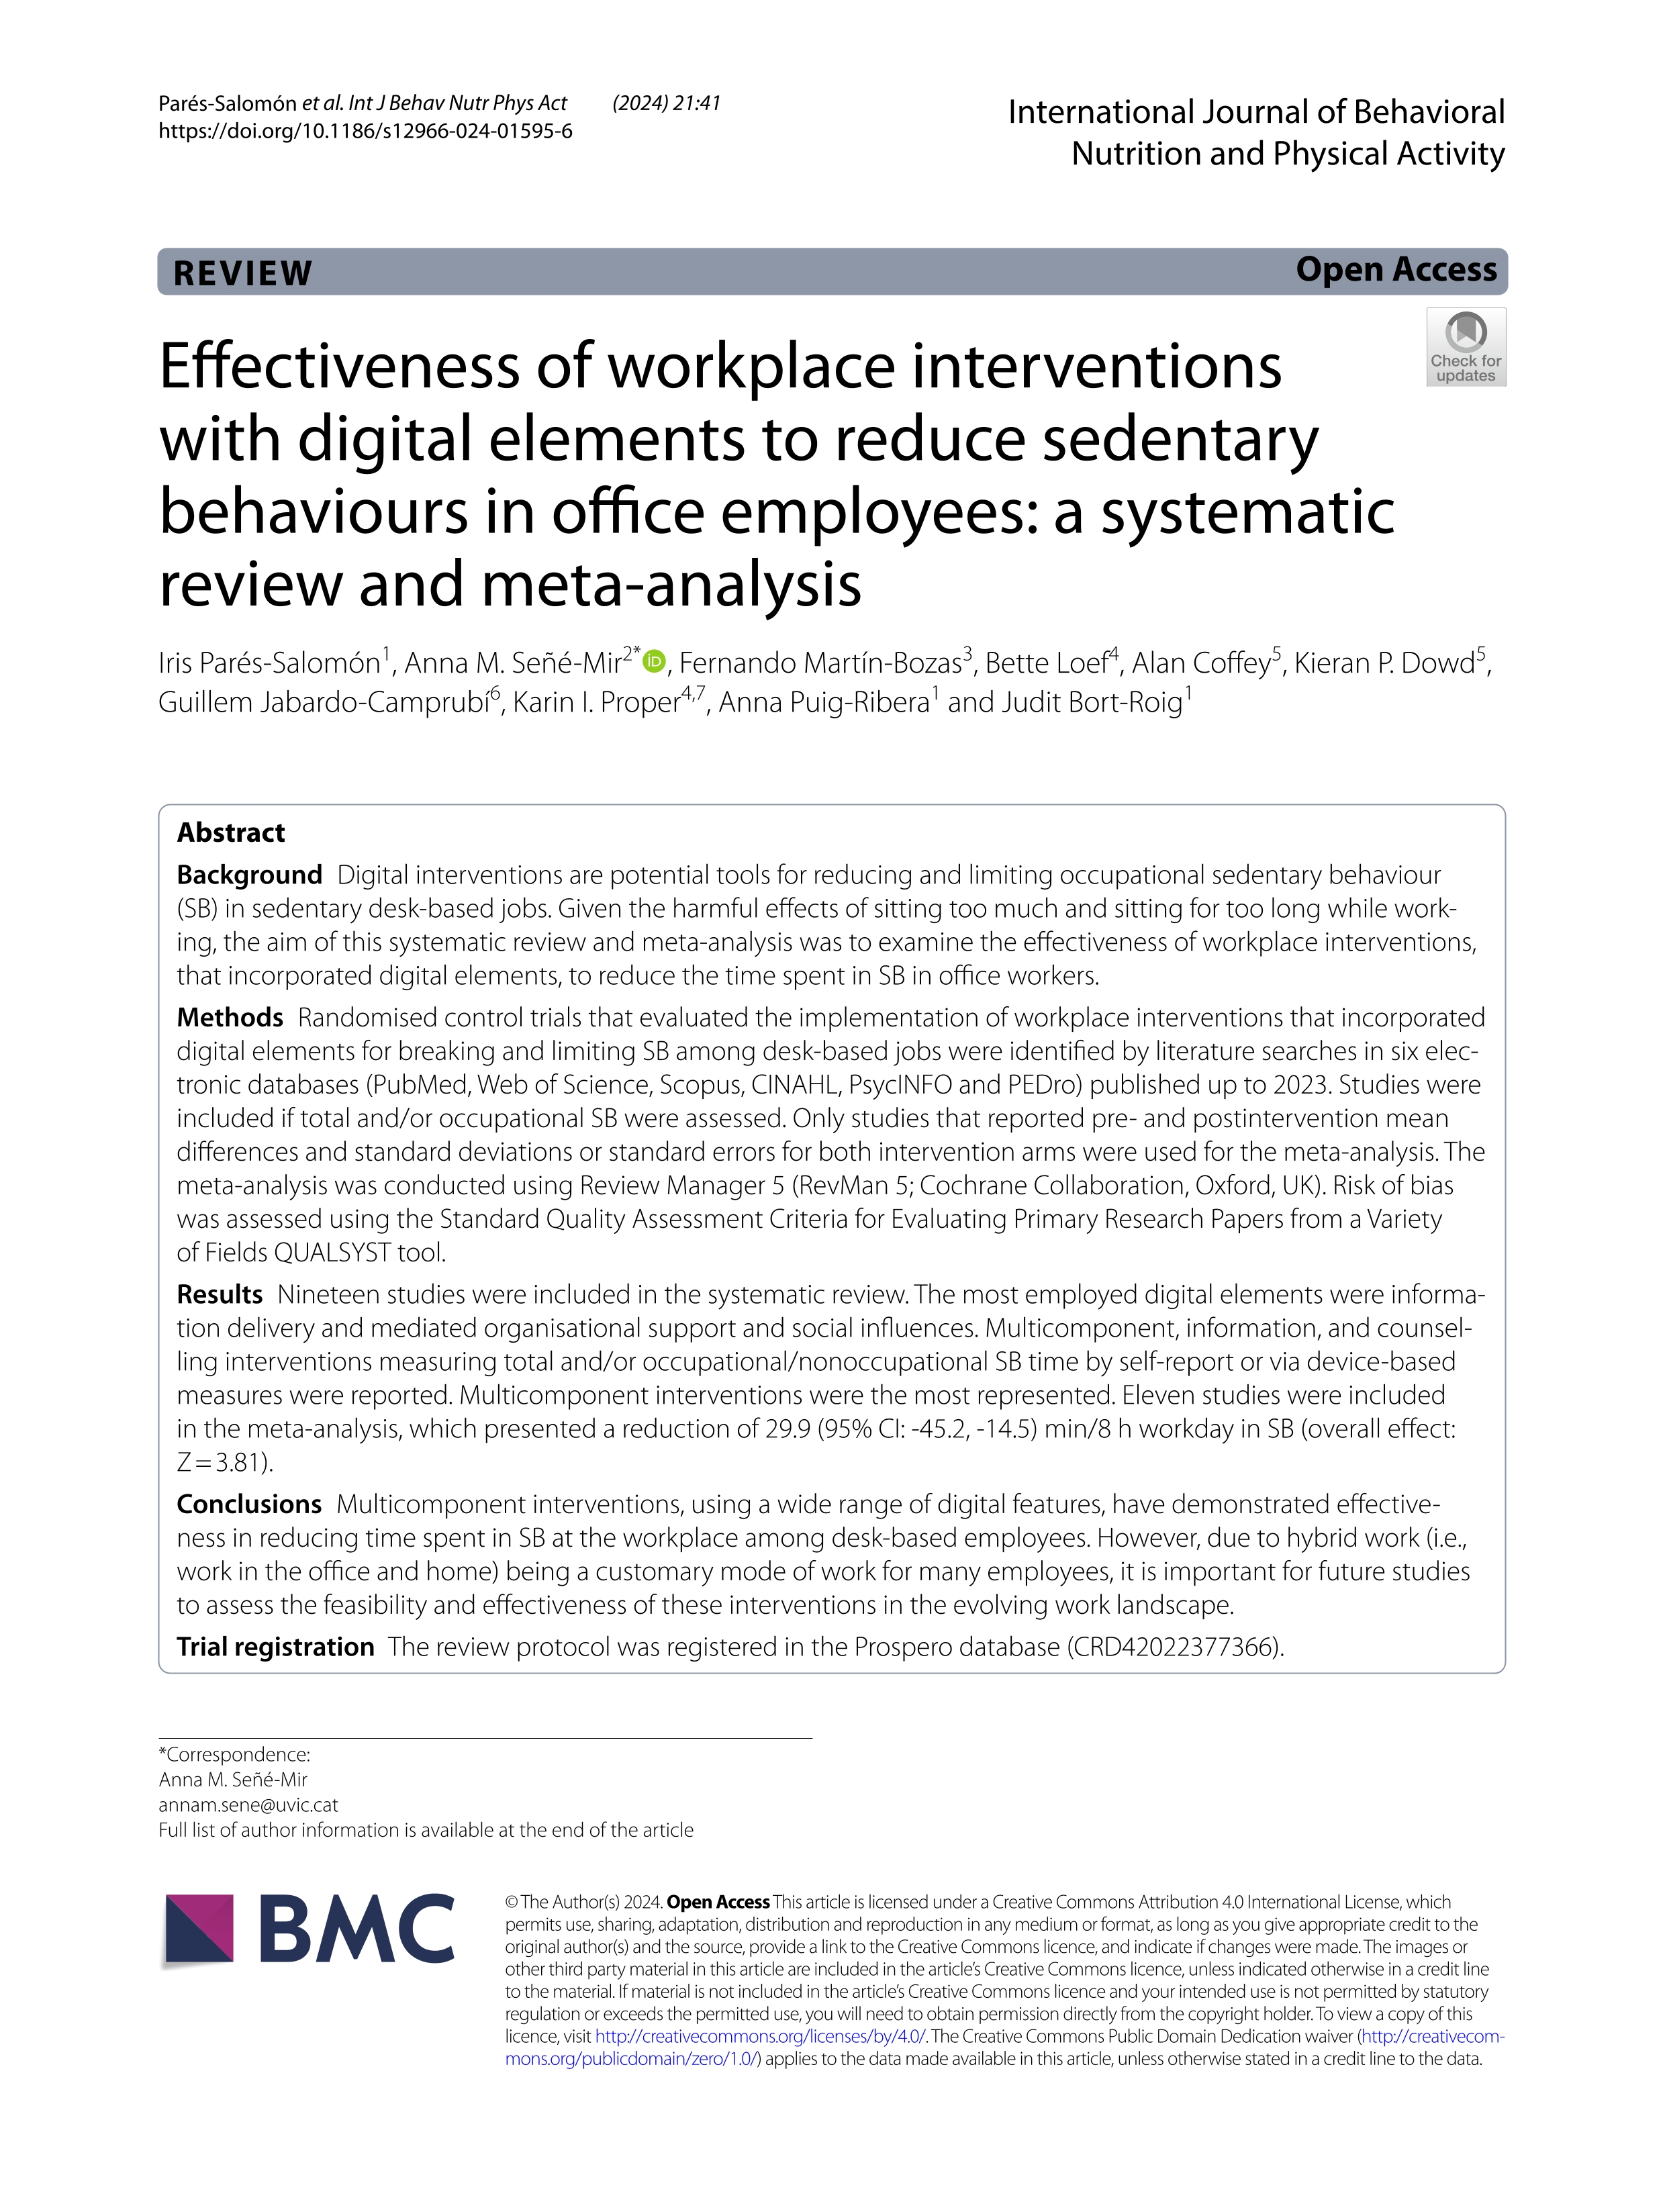 Effectiveness of workplace interventions with digital elements to reduce sedentary behaviours in office employees: a systematic review and meta-analysis